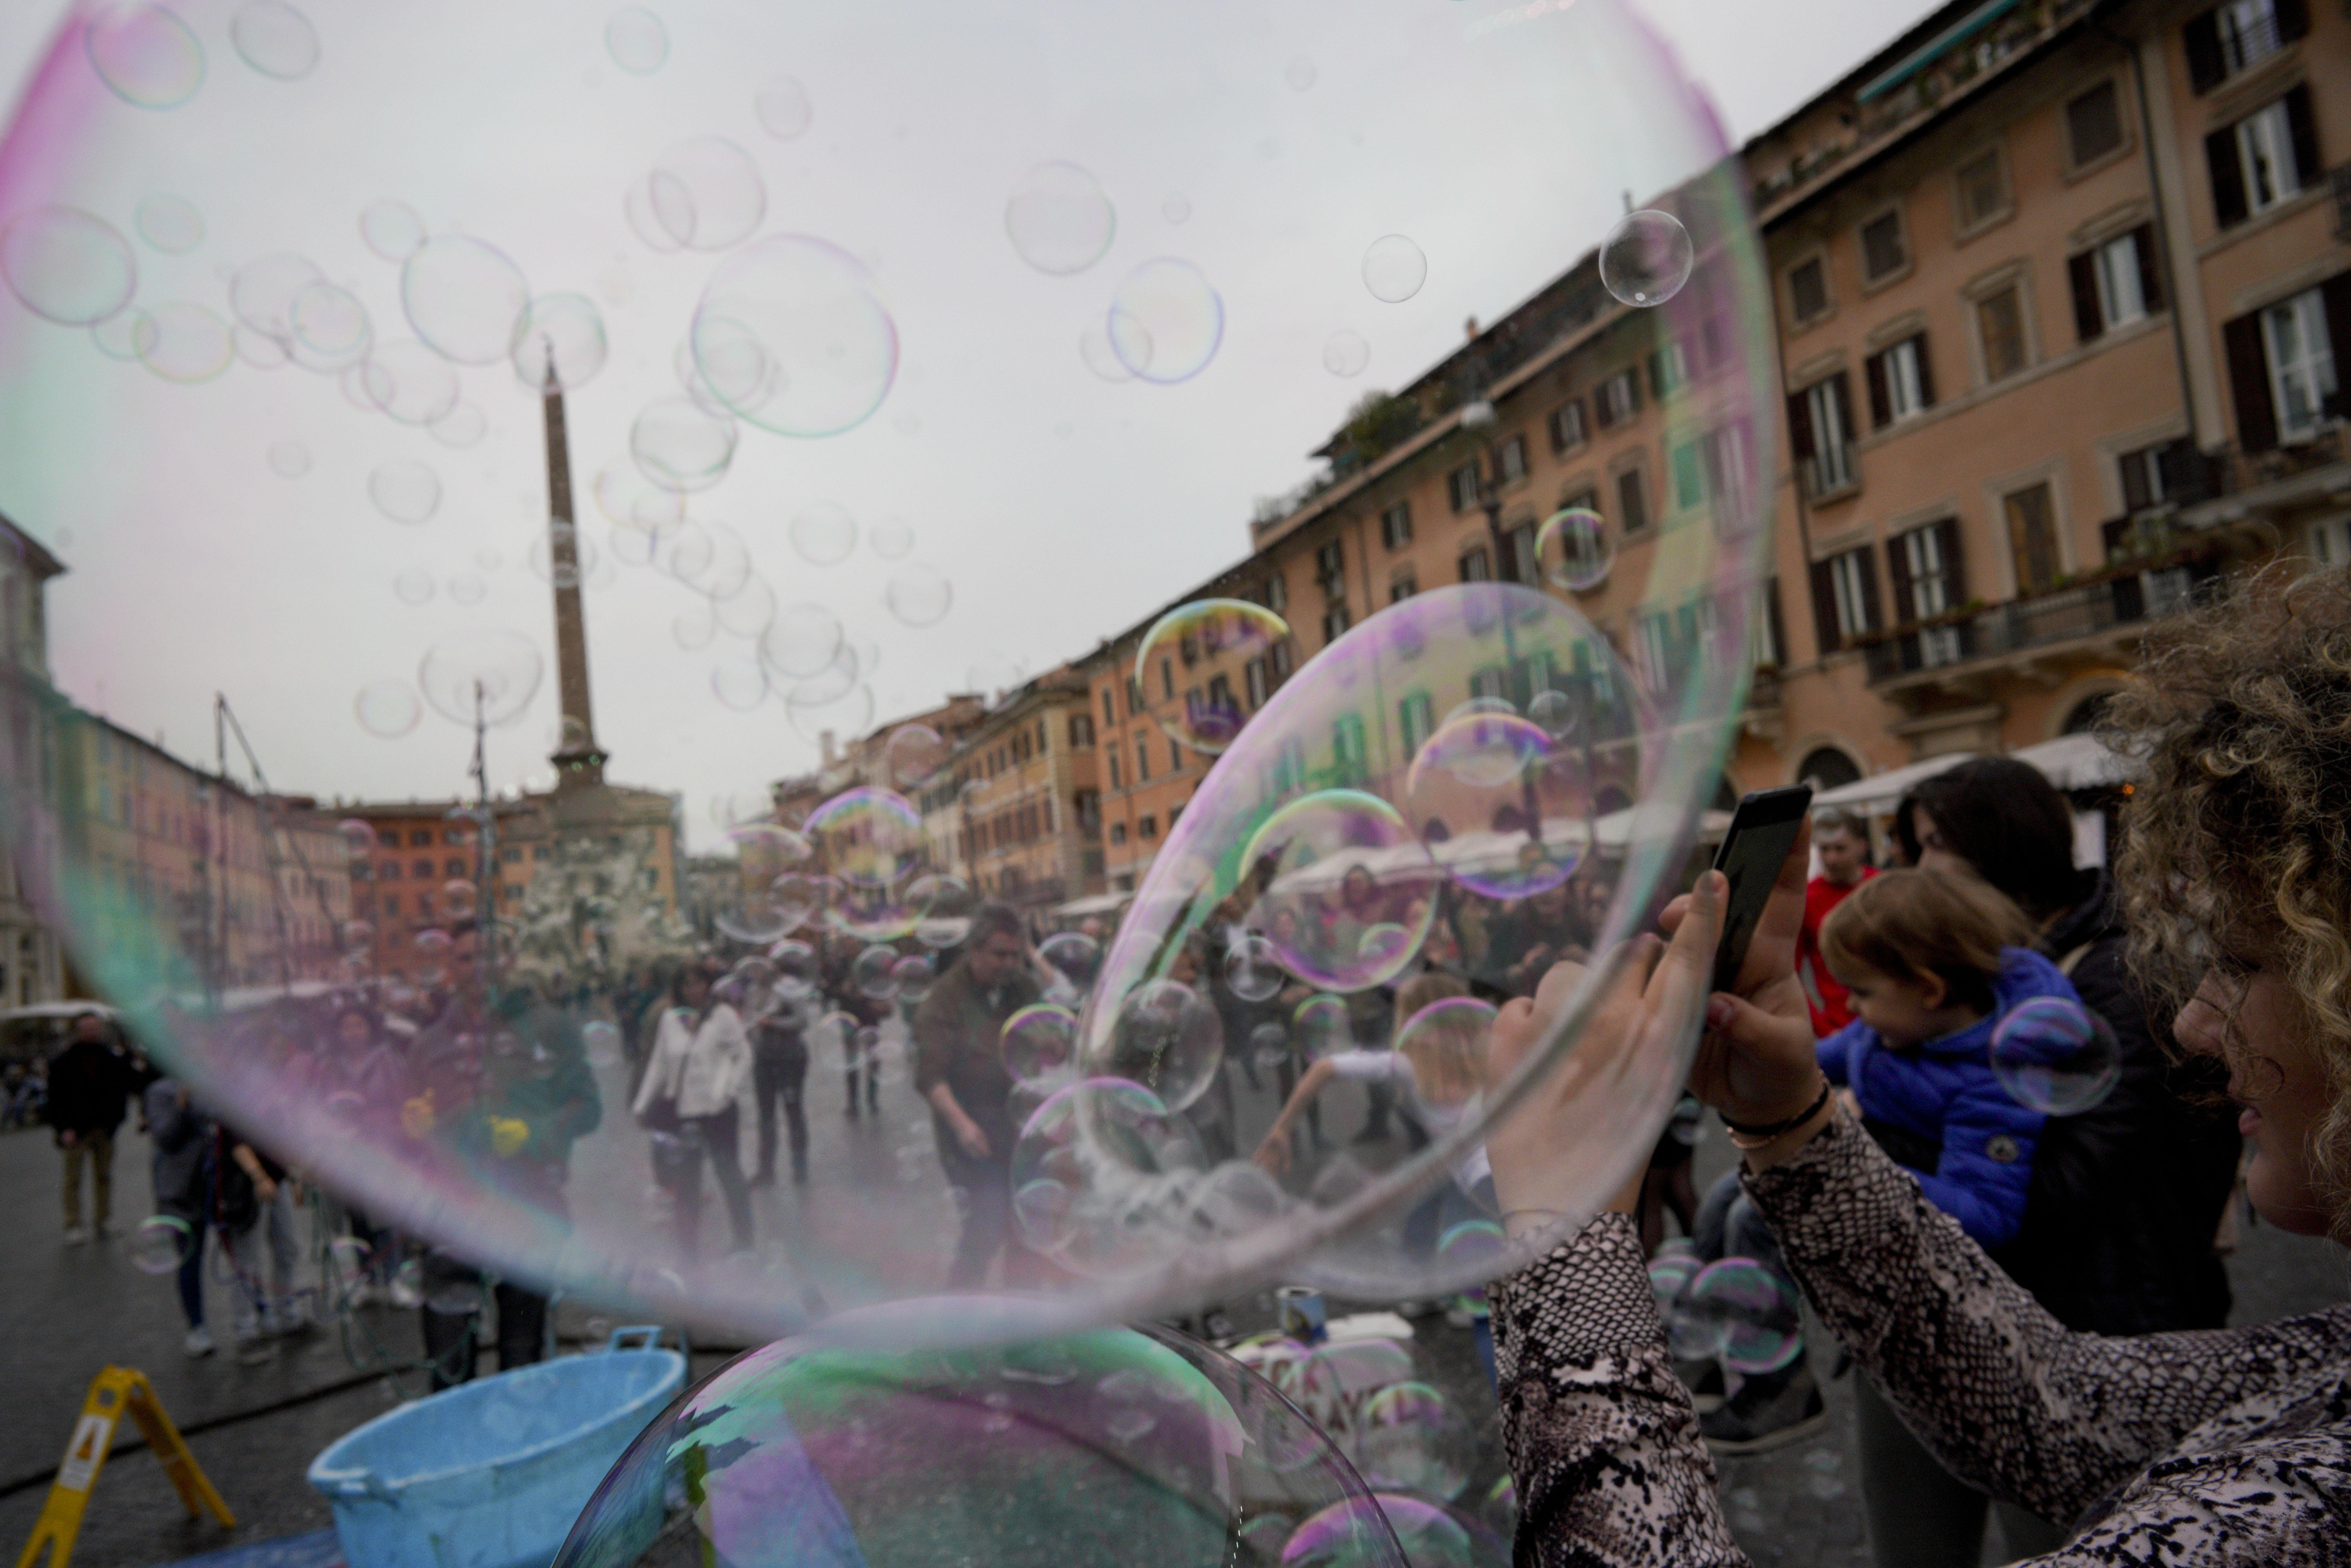 A woman takes pictures of soap bubbles made by a street artist in Rome's historical Piazza Navona square, Thursday, March 7, 2019. (AP Photo/Andrew Medichini)